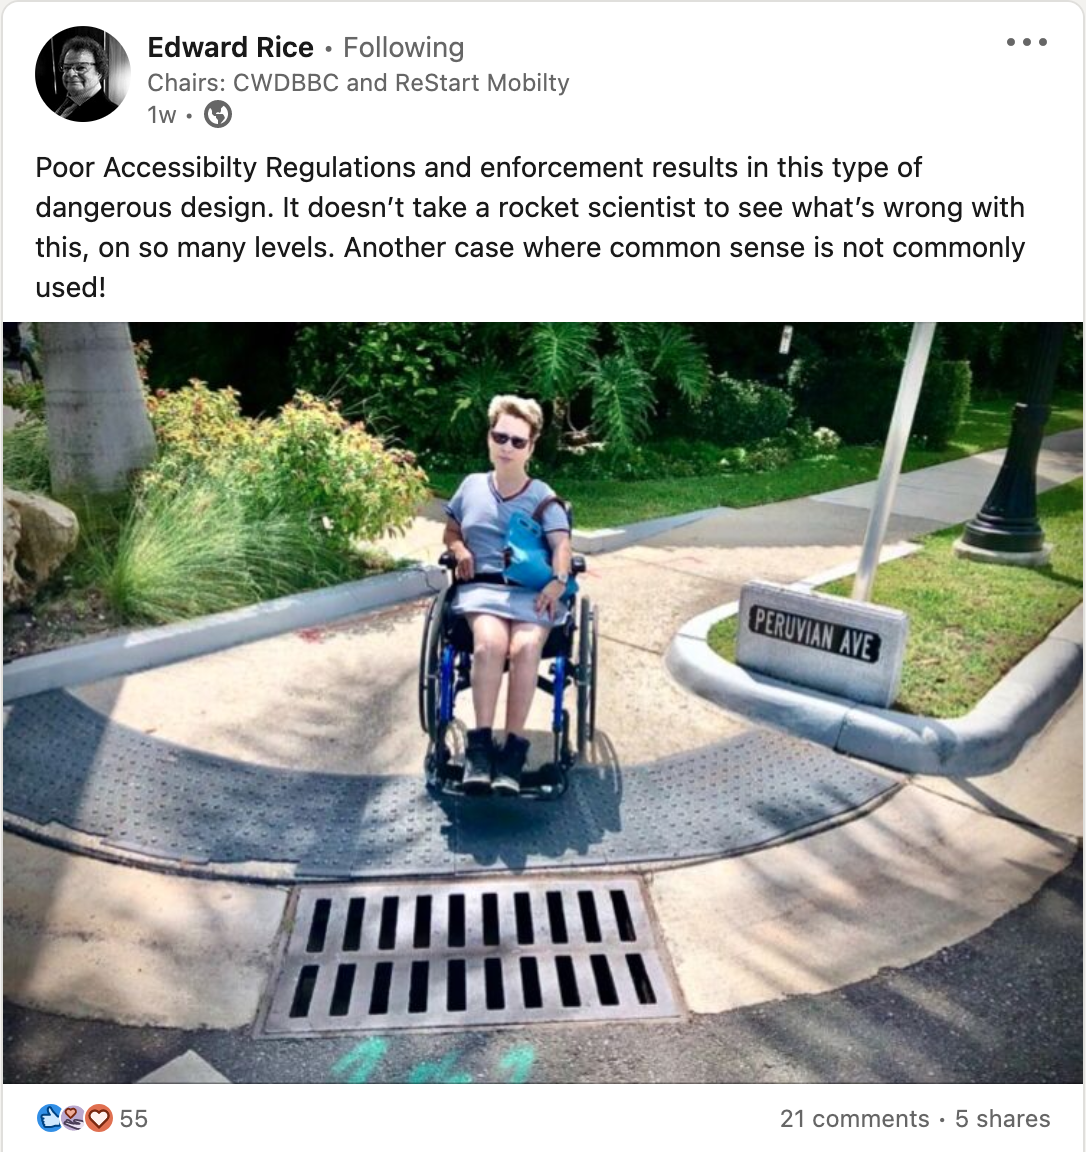 Screenshot of a post on Linkedin, attached image shows a person who is a wheelchair user about to cross a road but a drain is positioned under the lip of the curb, the drain has wider gaps than wheels on the wheelchair, so it is possible the chair wheels will get stuck.